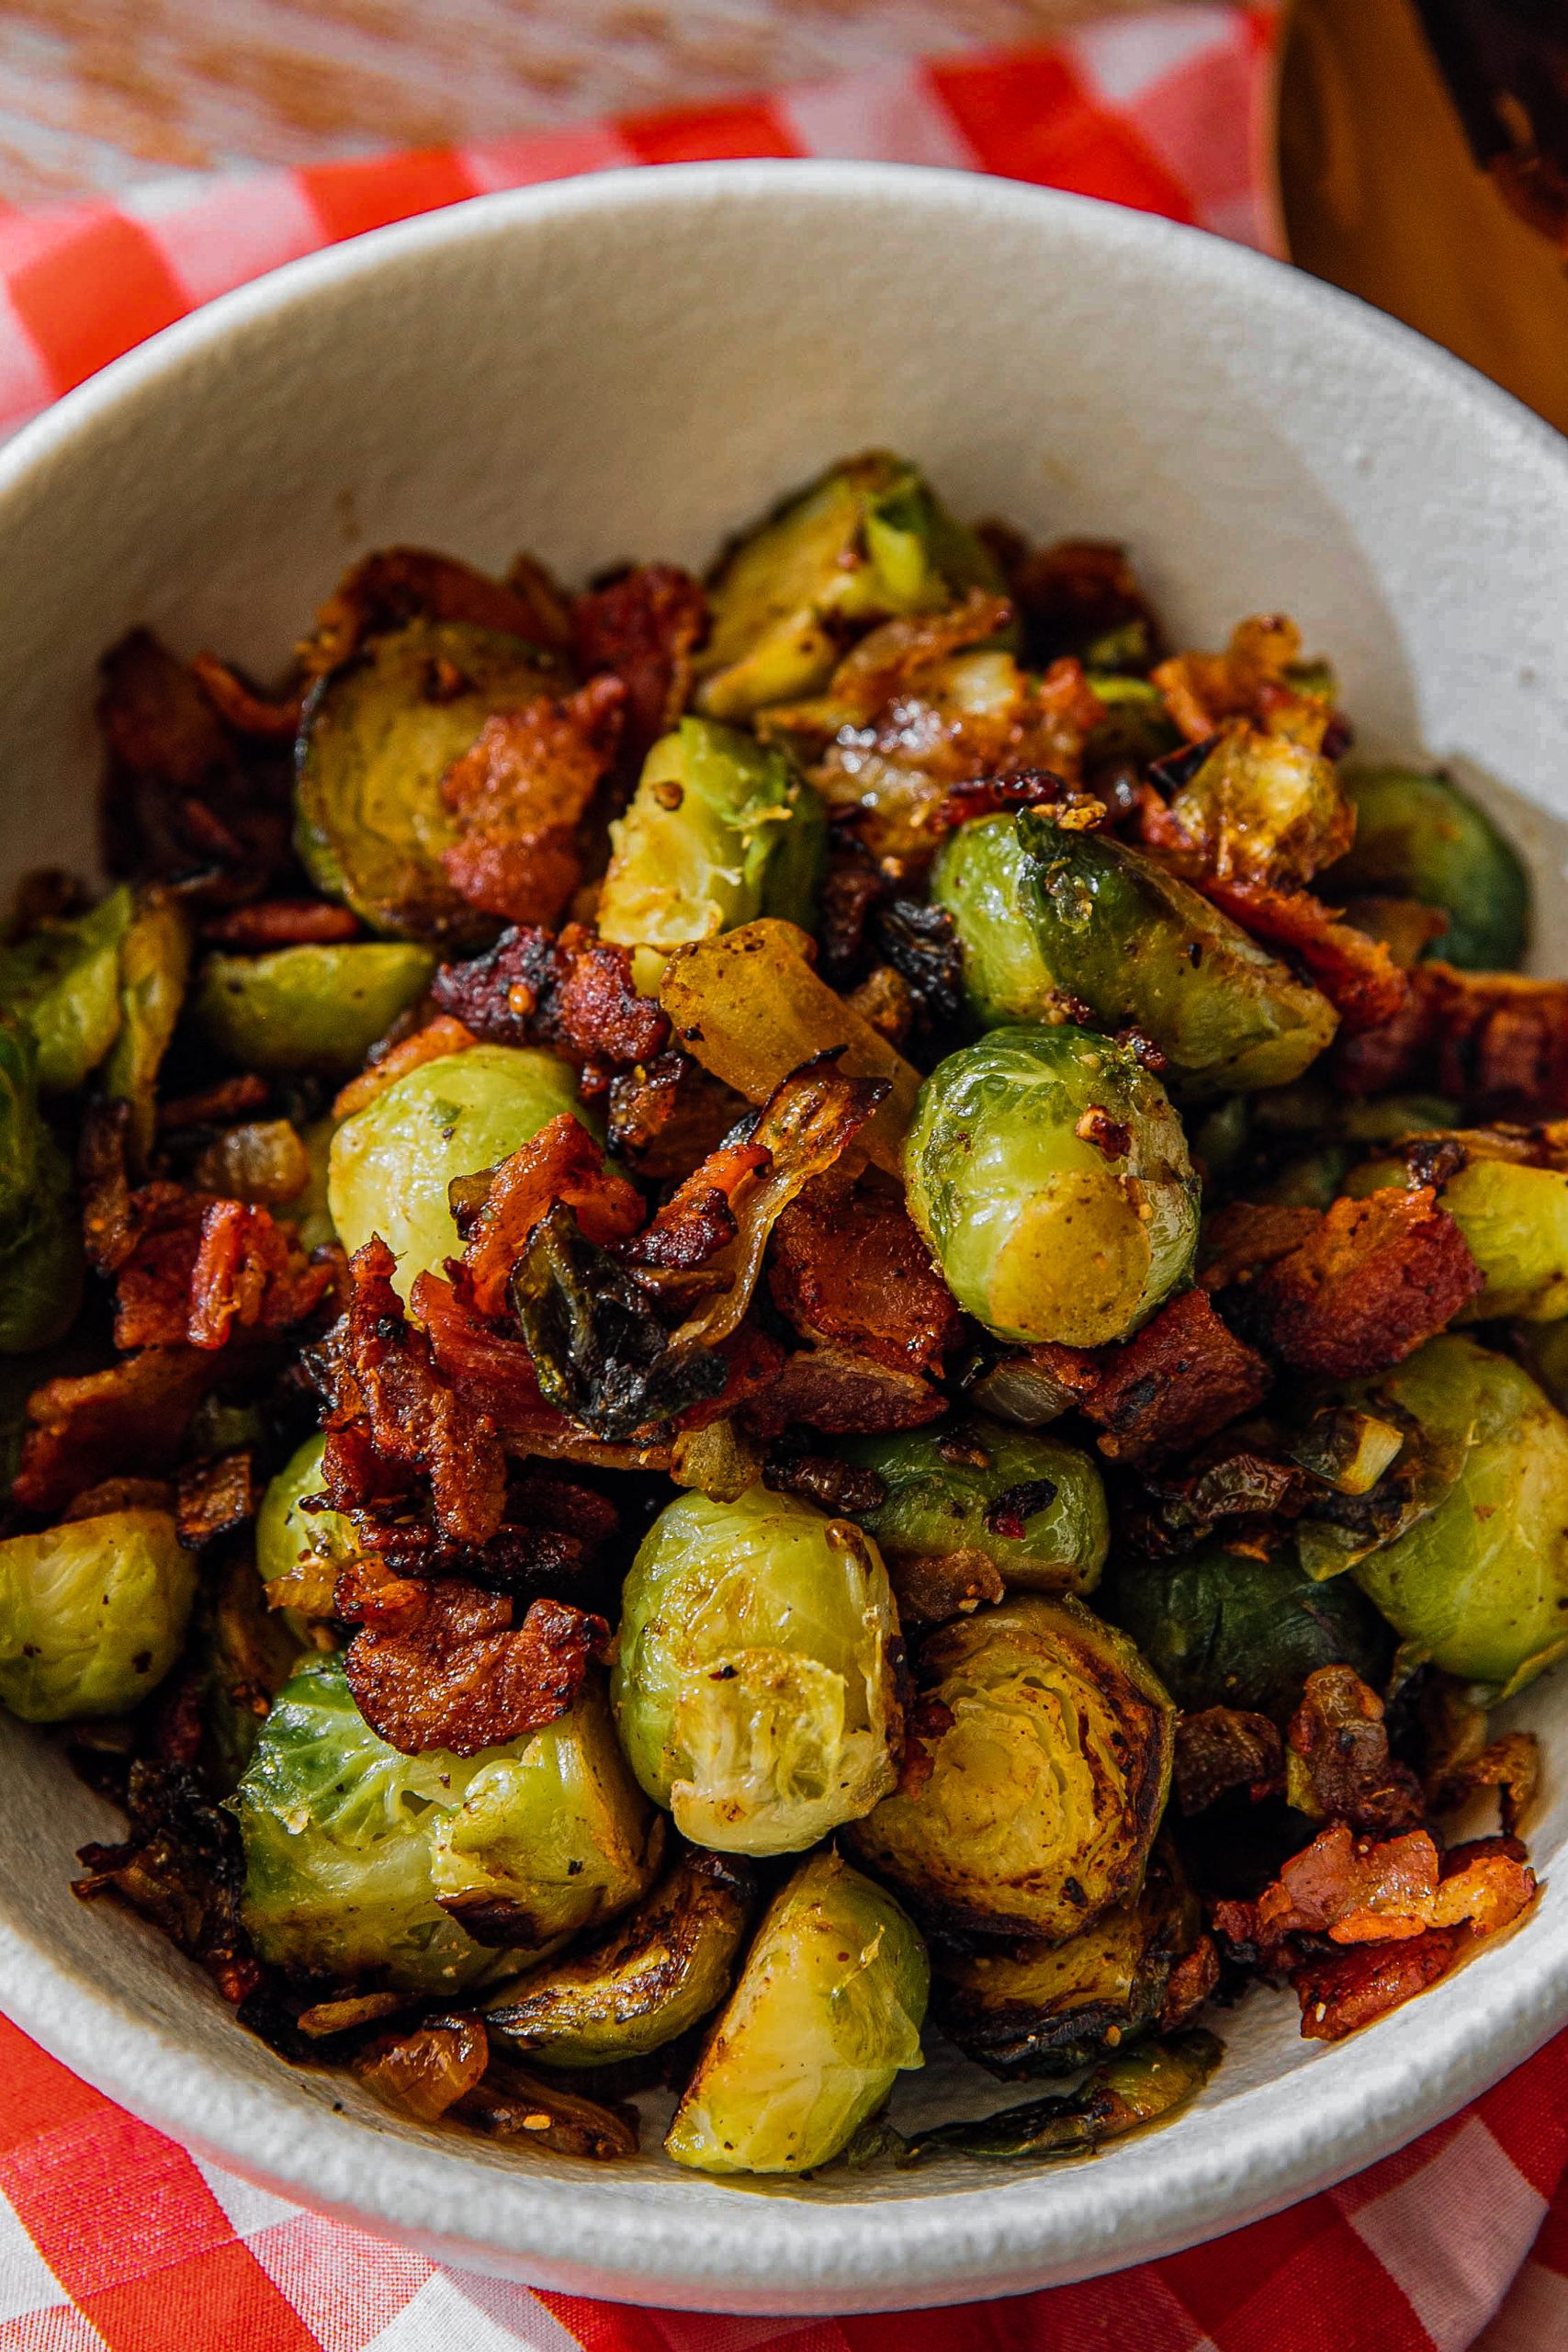 Brussel Sprouts with Bacon And Garlic, Brussel Sprouts with Bacon And Garlic recipe